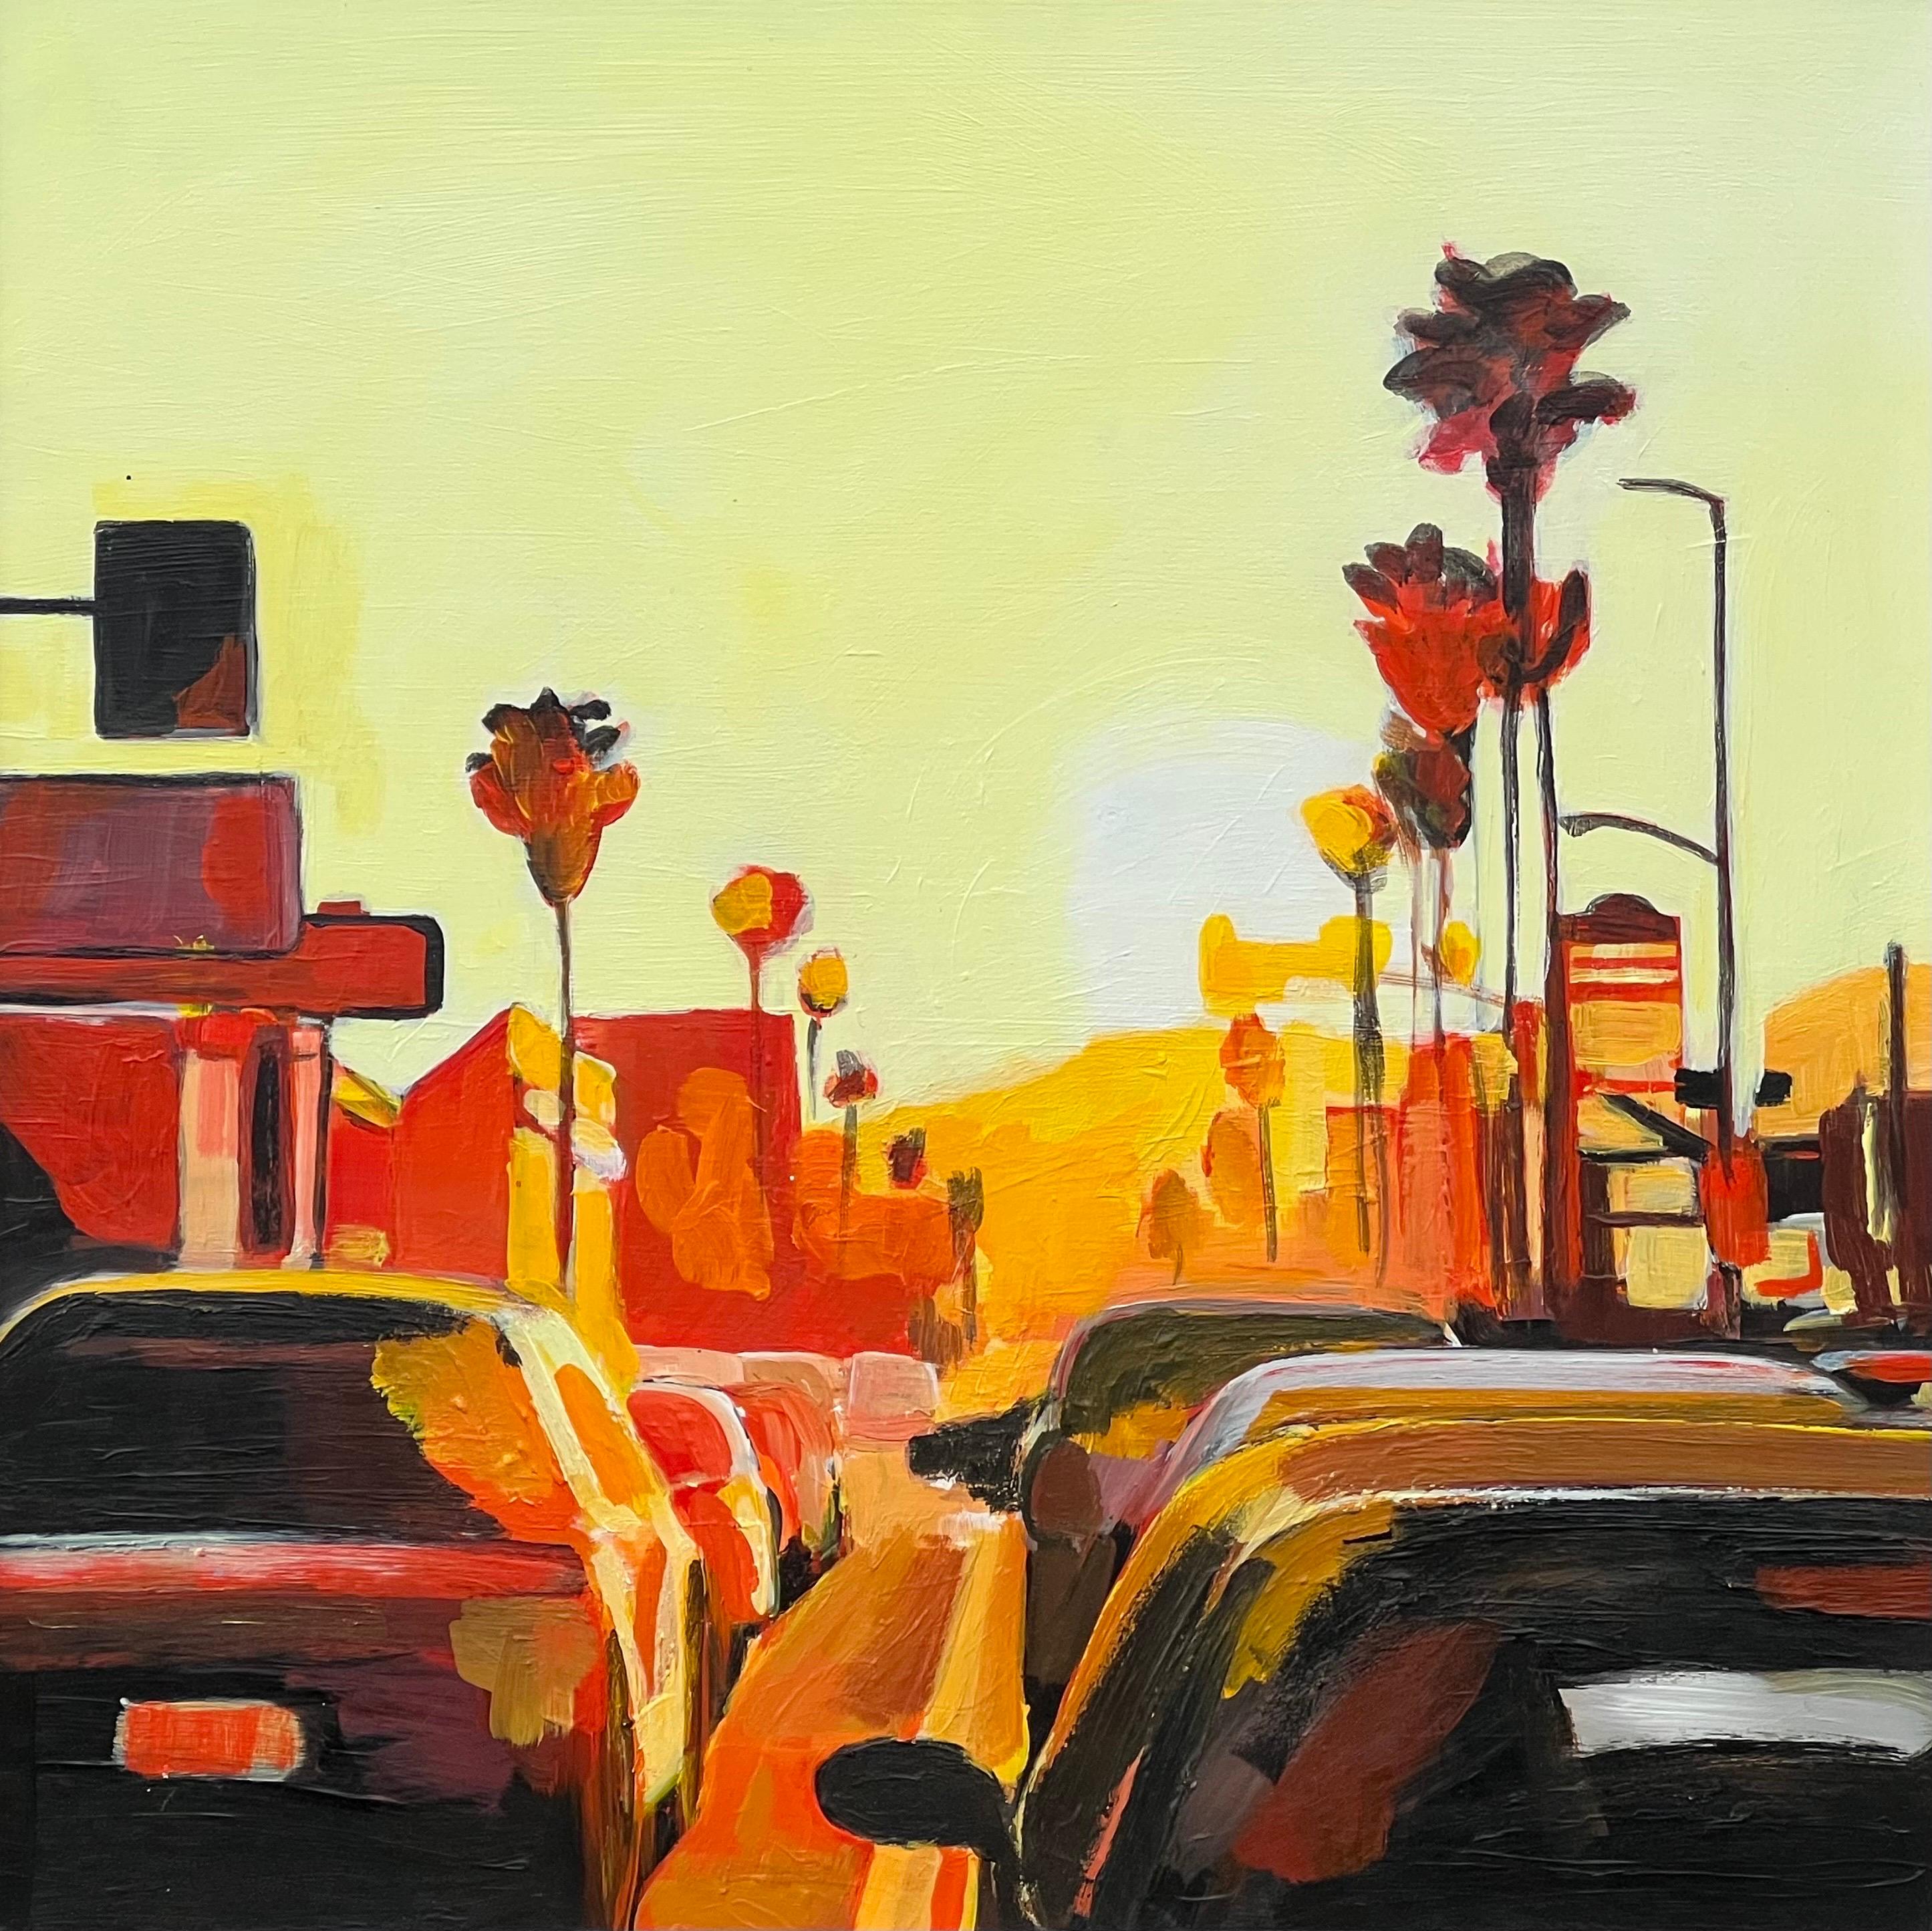 Los Angeles Traffic Street Scene Study from California Series by British Artist - Painting by Angela Wakefield